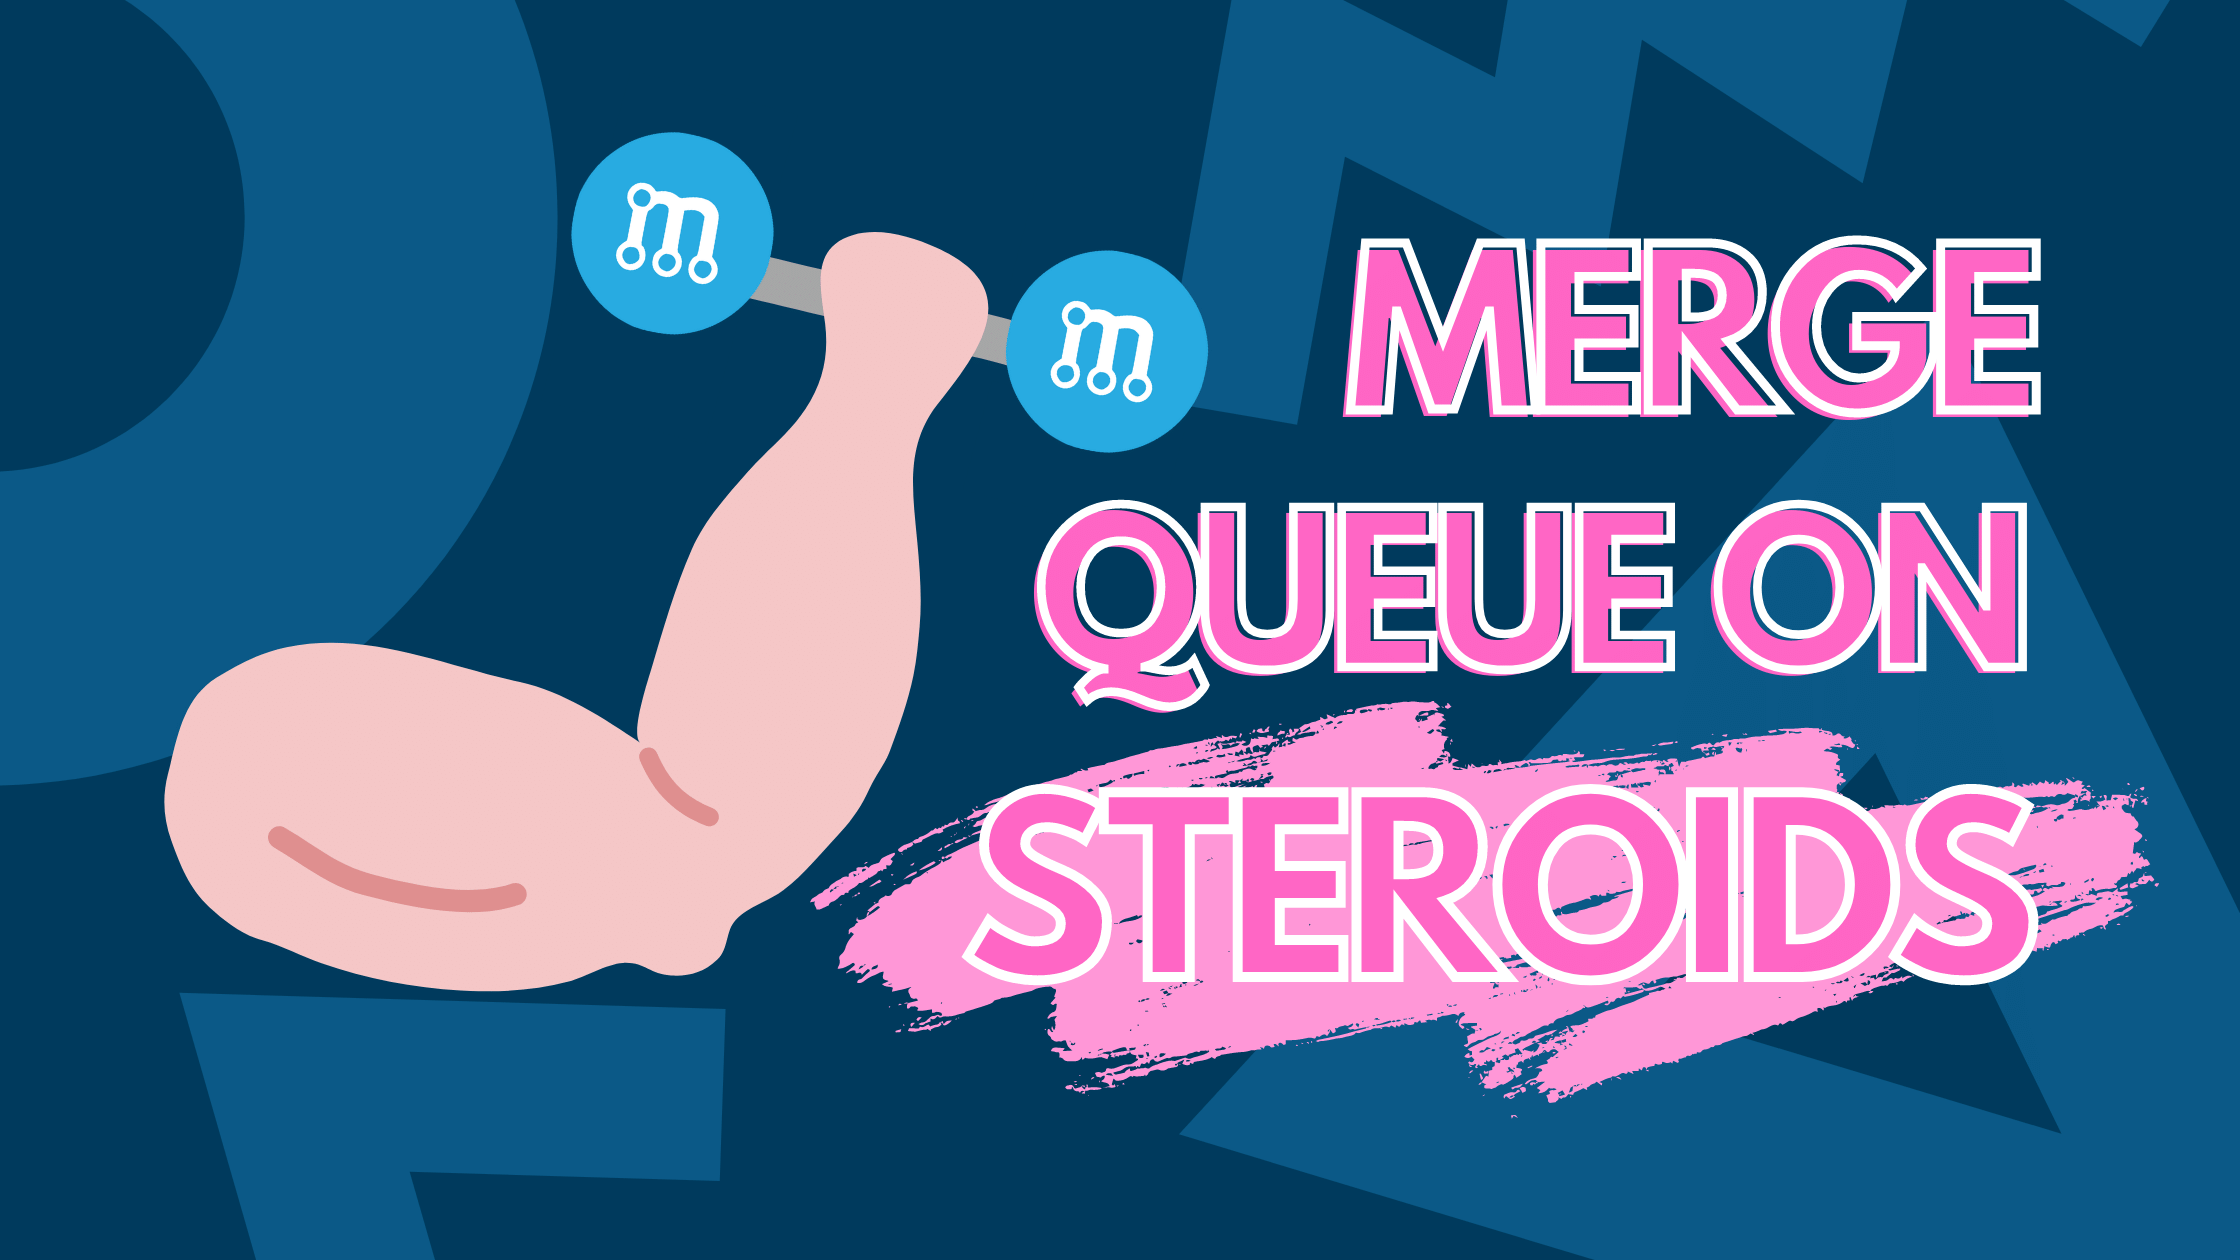 A Merge Queue on Steroids